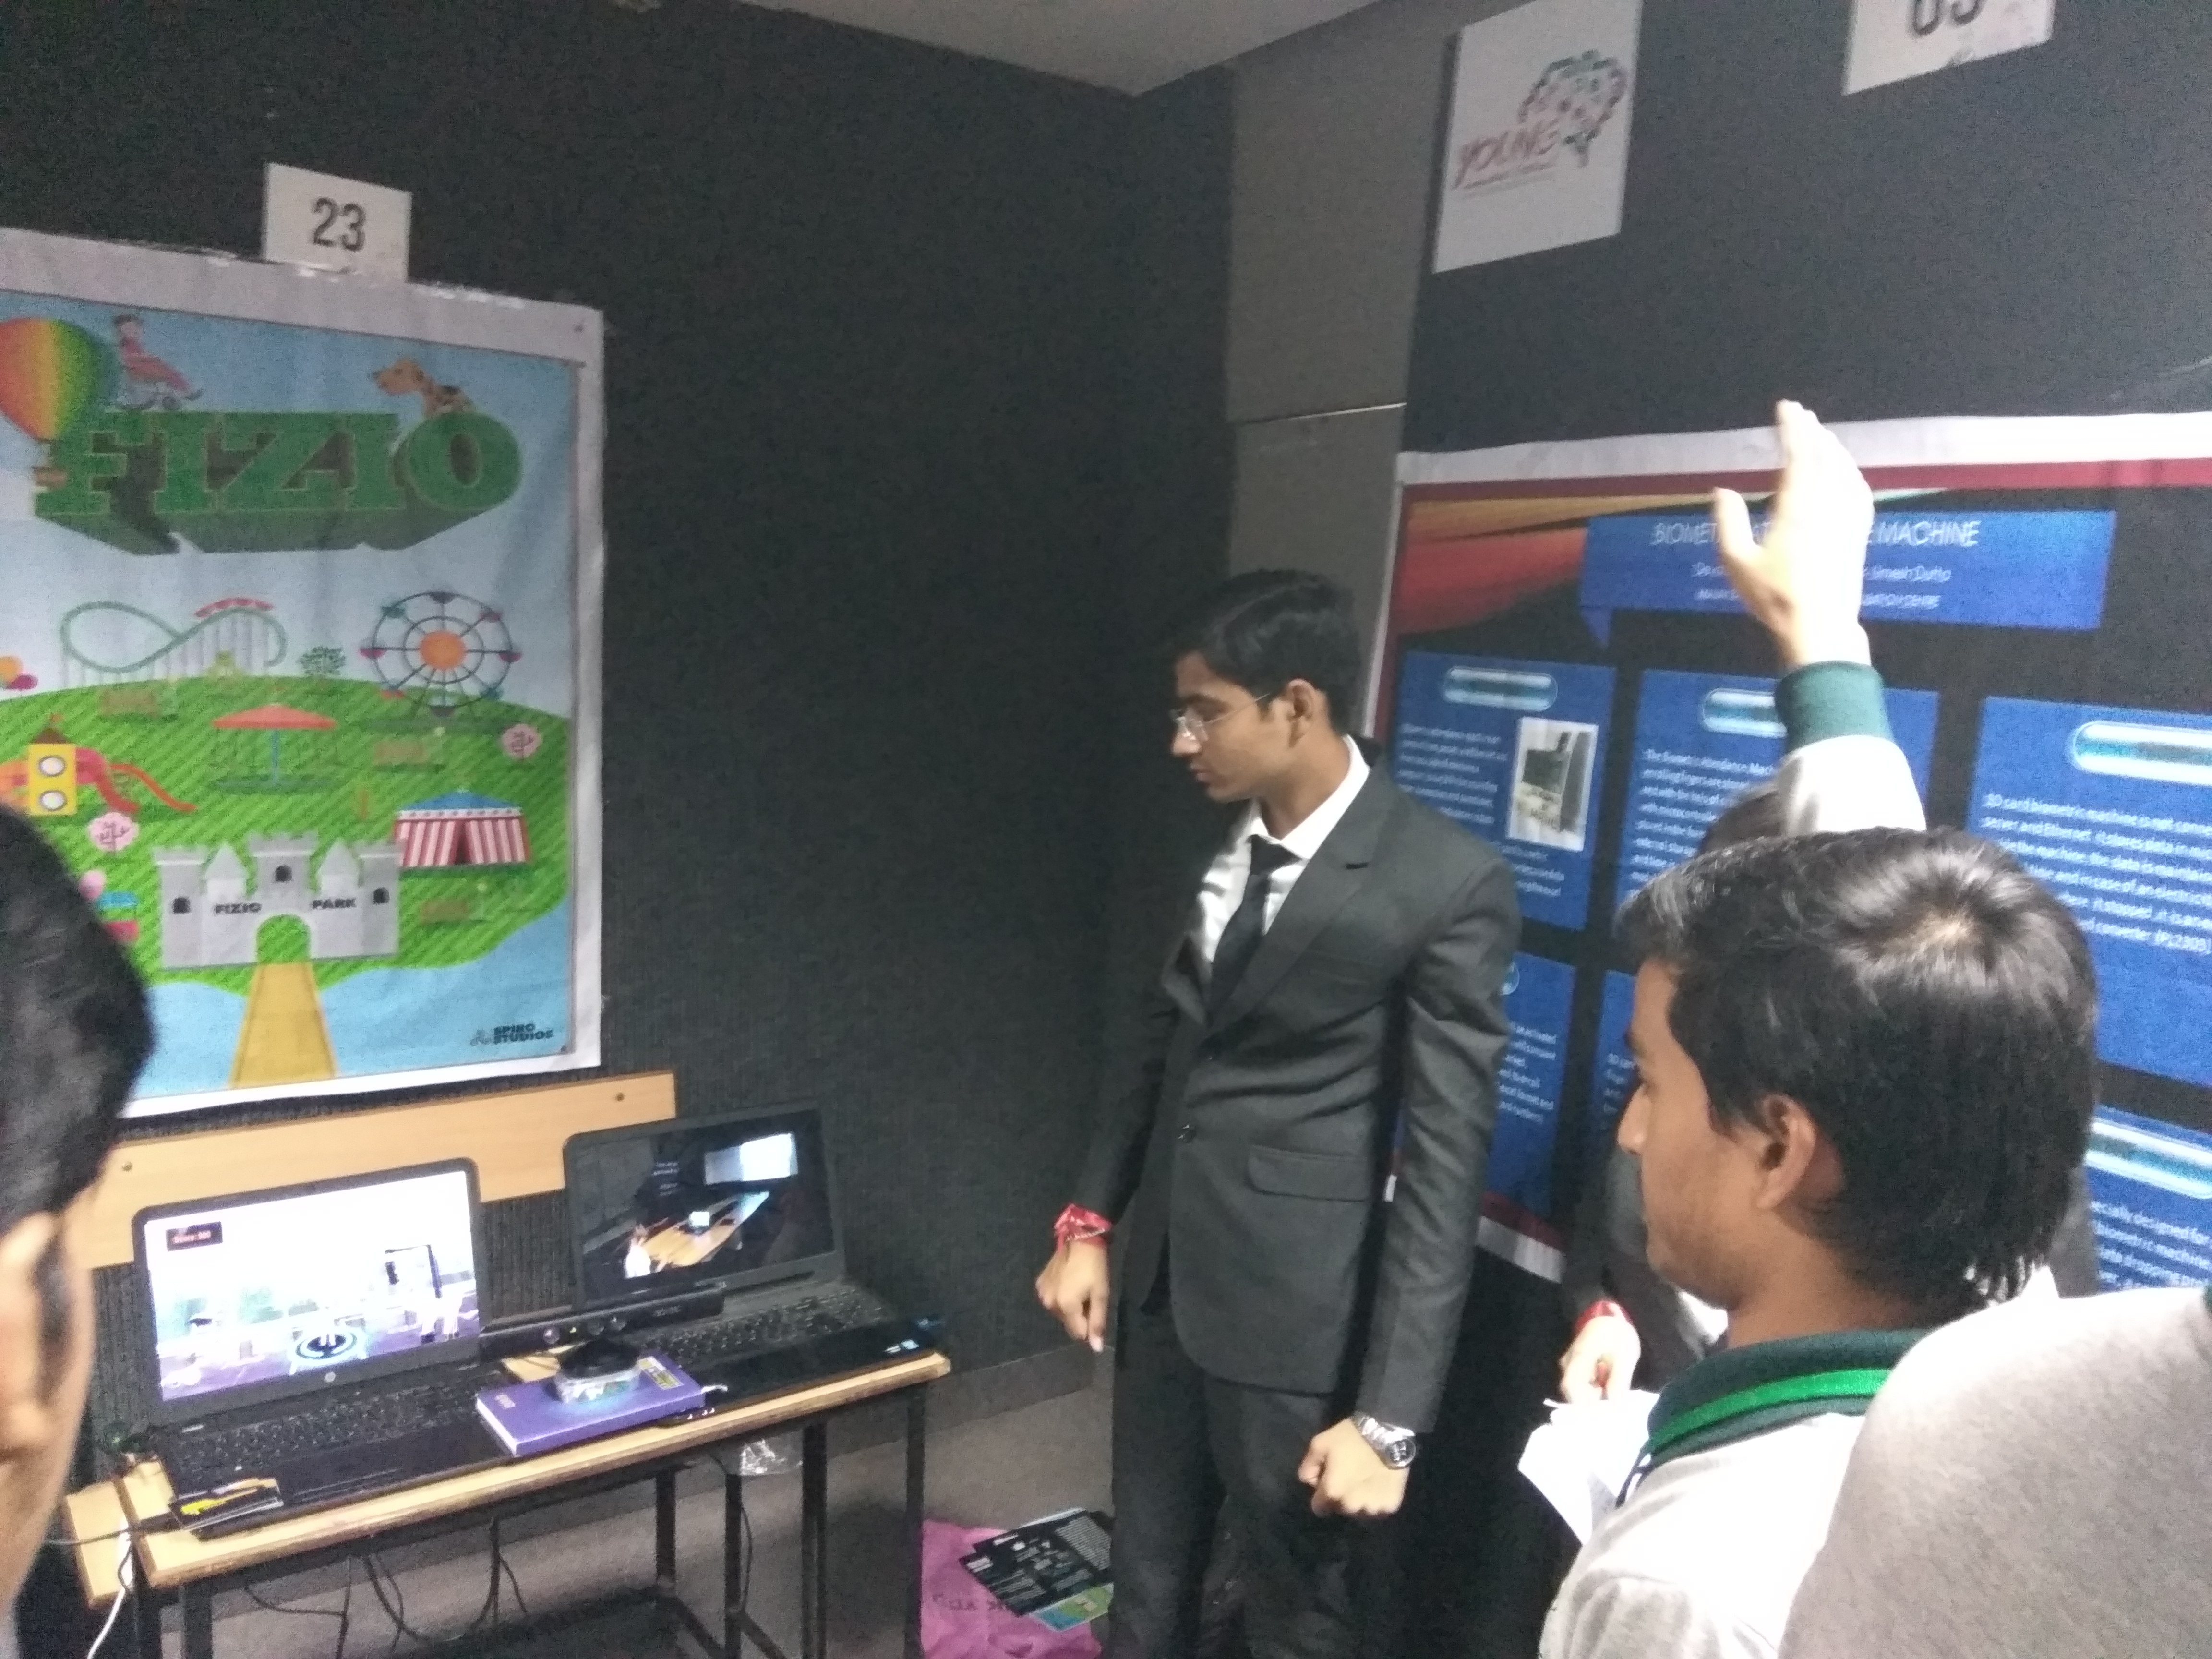 Virtual rehab startup provides affordable, gamified solution to physiotherapy in India